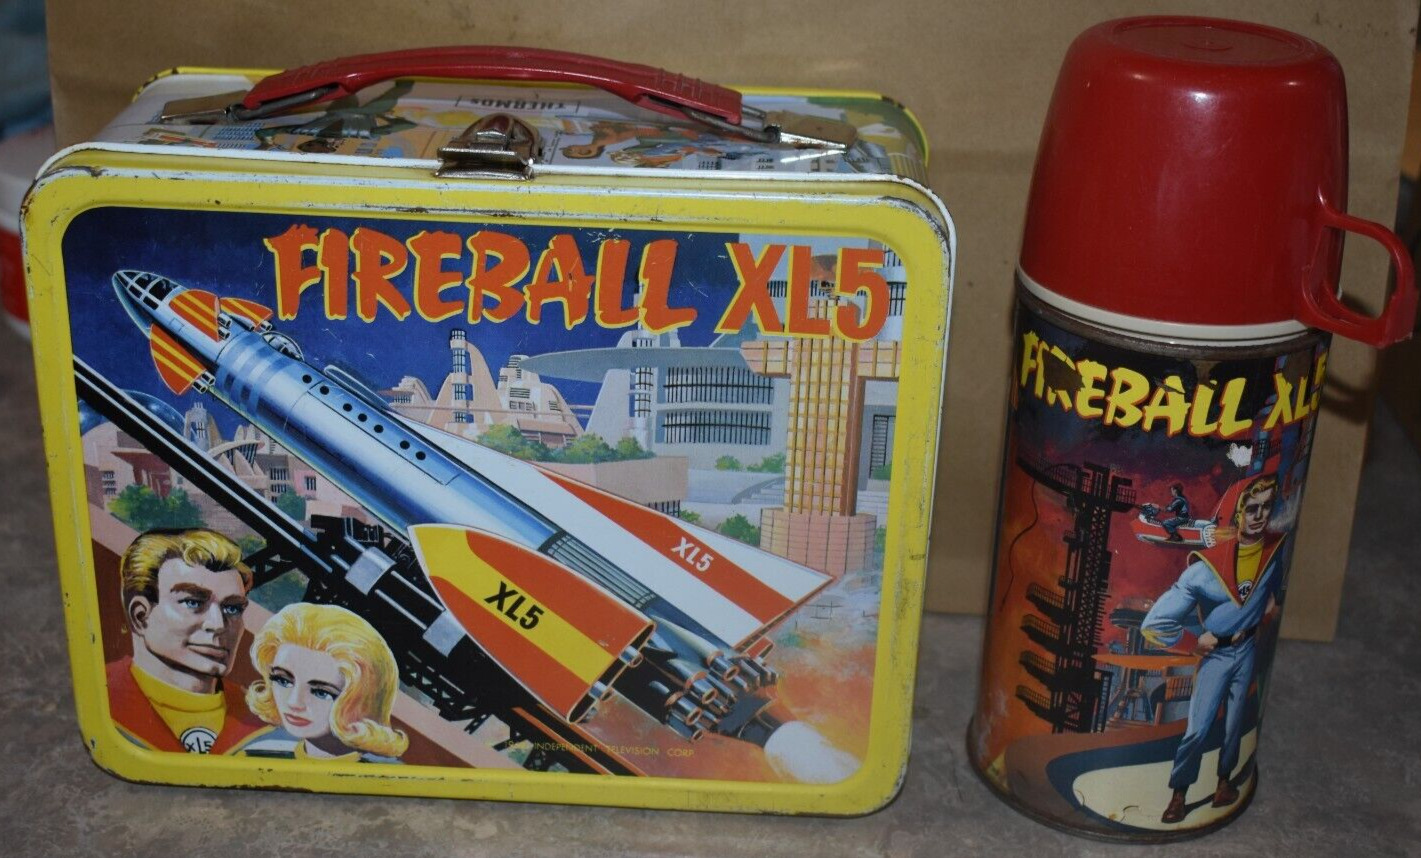 VINTAGE FIREBALL XL5 METAL LUNCHBOX AND THERMOS SPACE ROBOTS 1964 (TIER RACK 2)